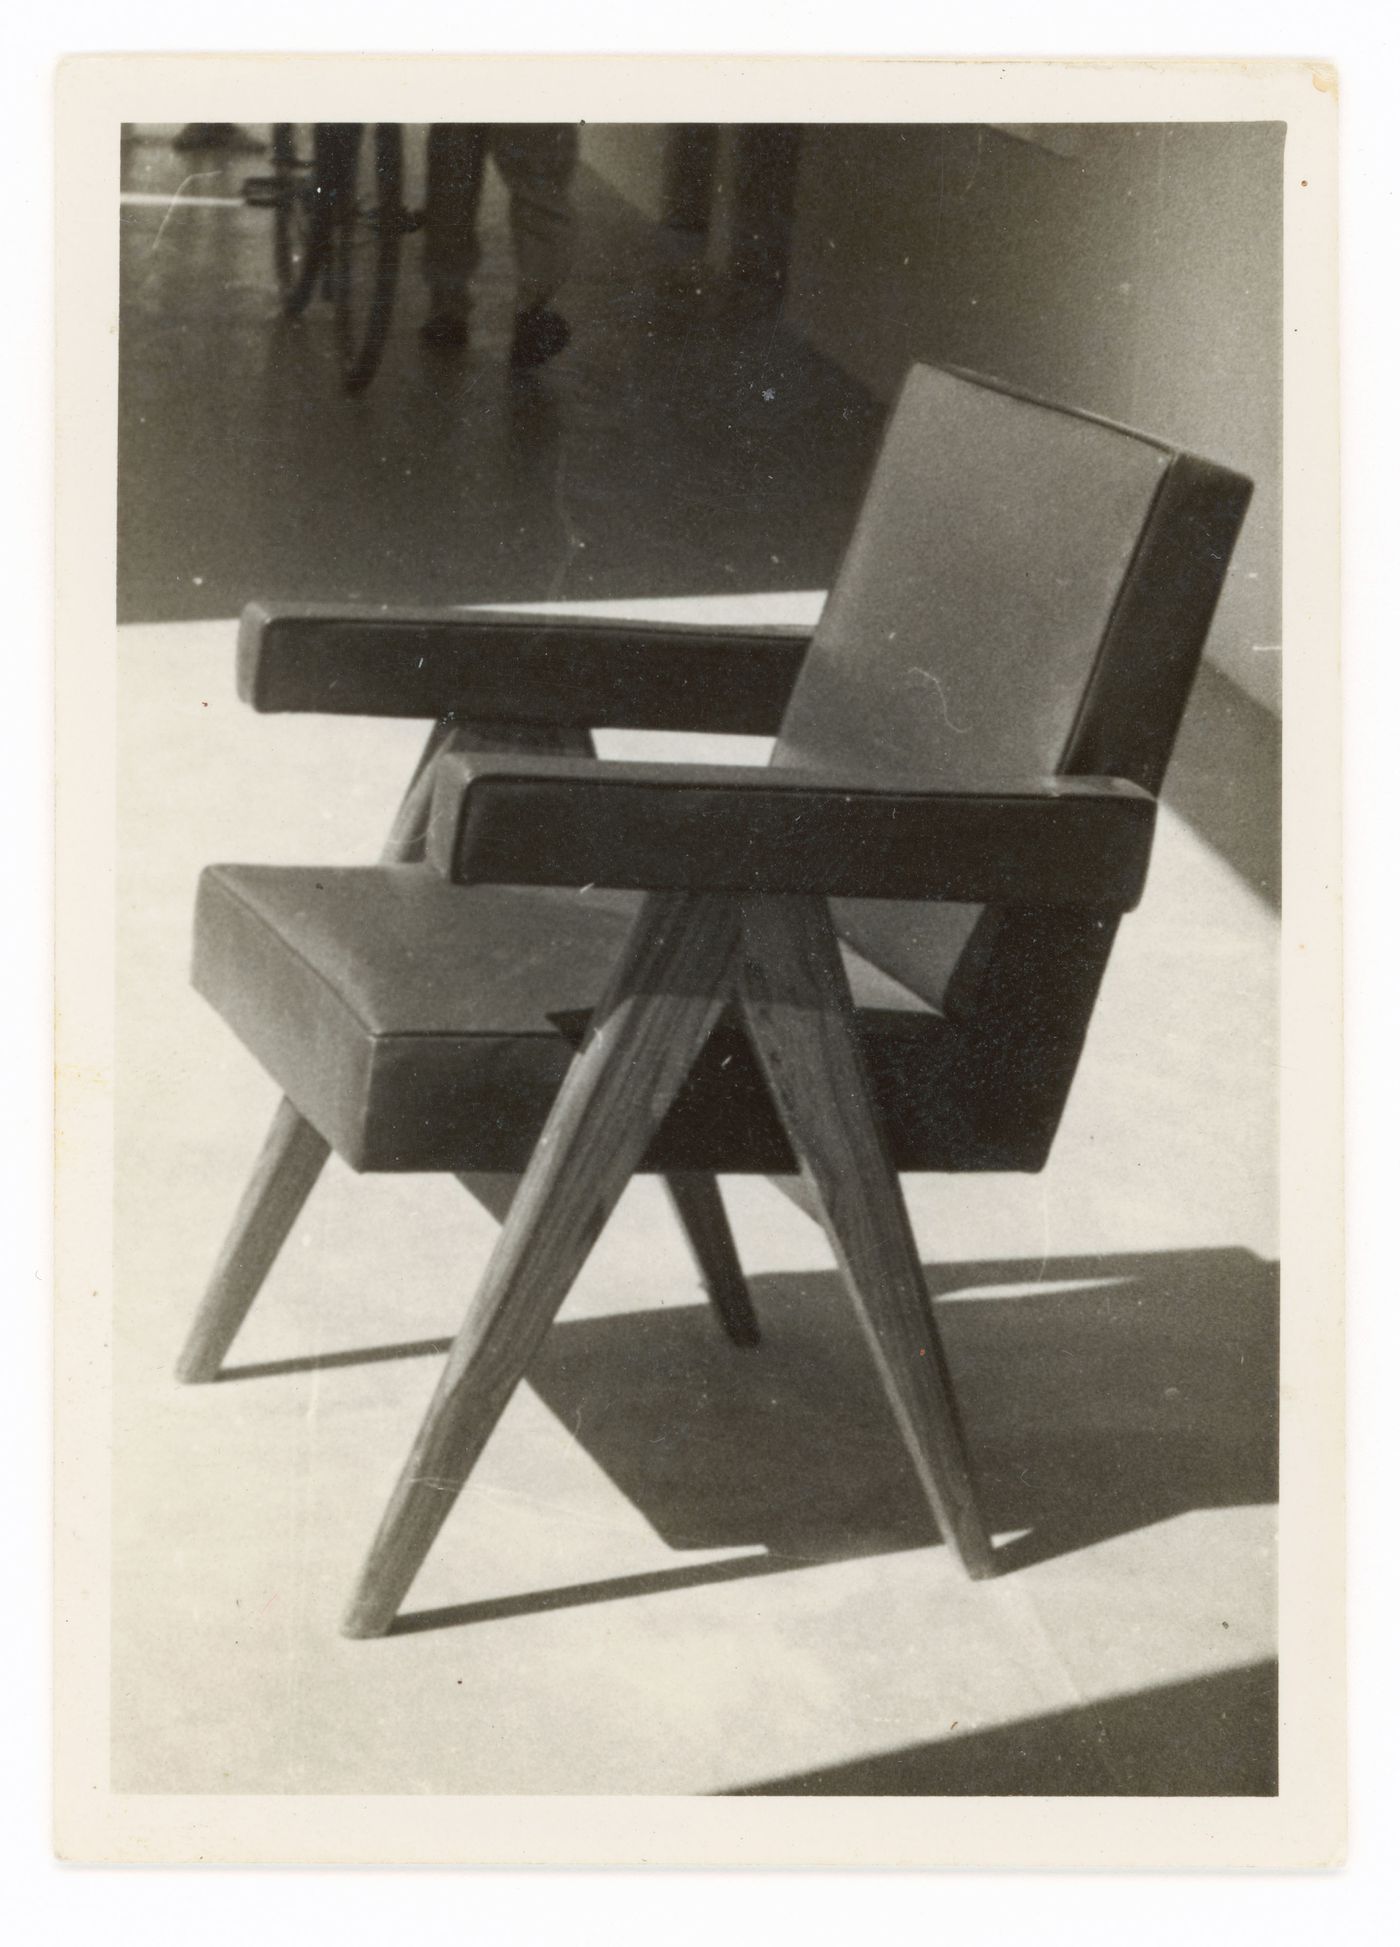 View of an armchair designed by Pierre Jeanneret, Chandigarh, India